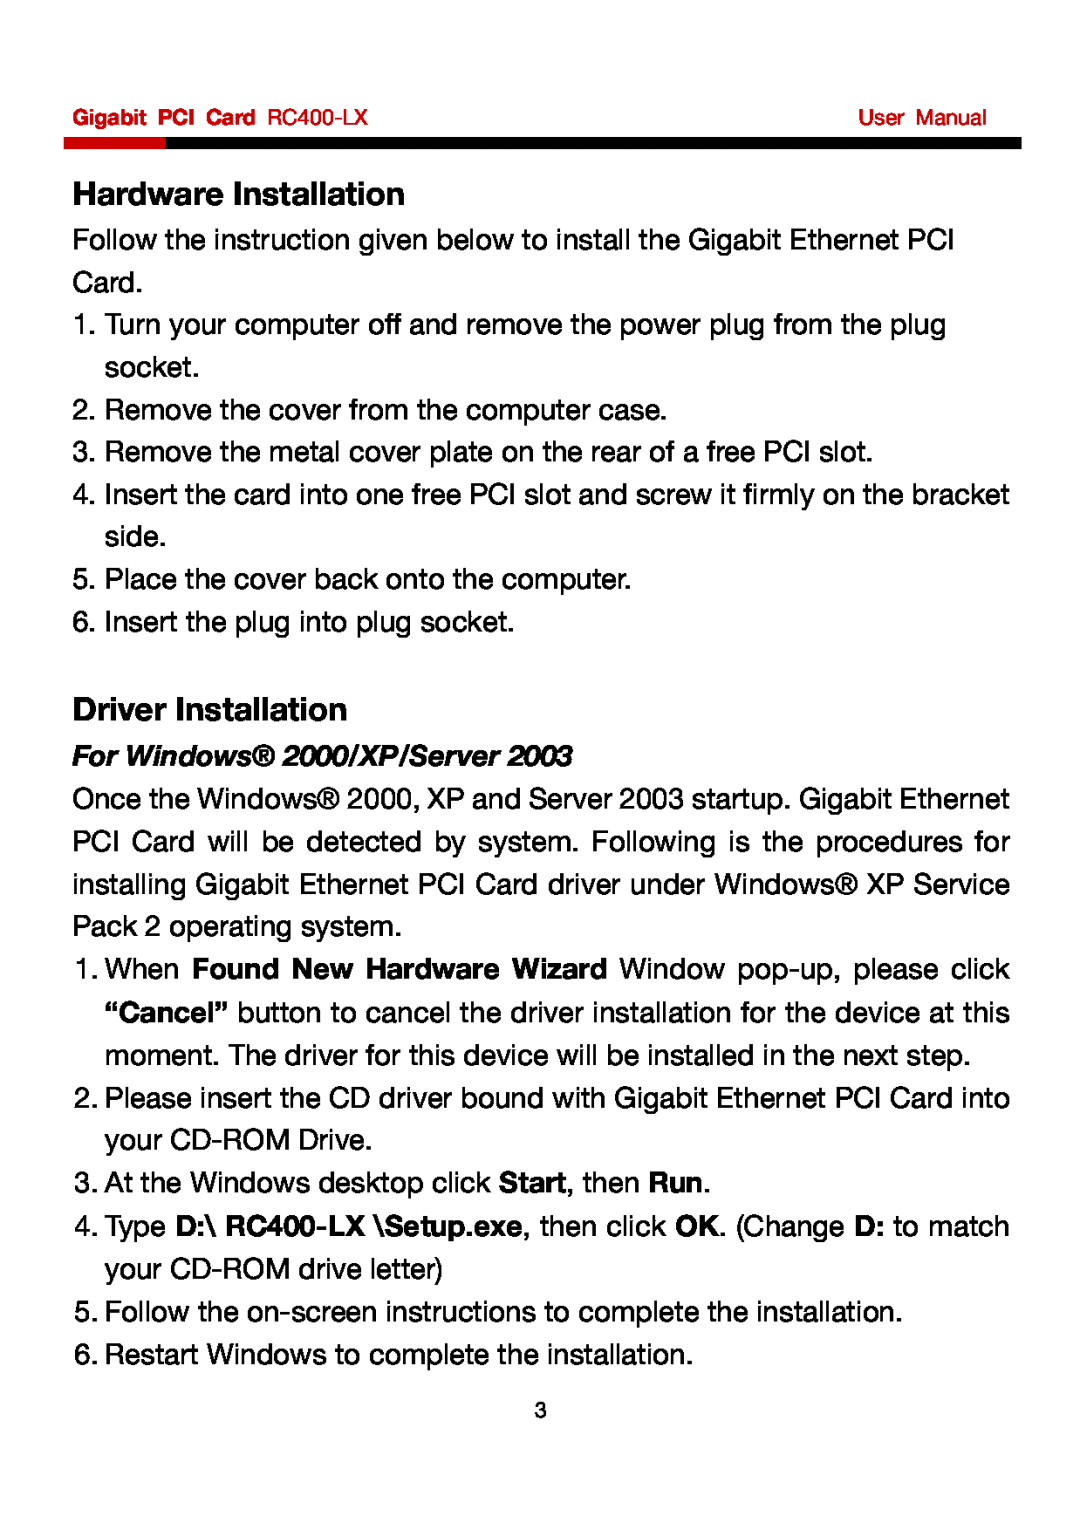 Rosewill RC-400 user manual Hardware Installation, Driver Installation, For Windows 2000/XP/Server 